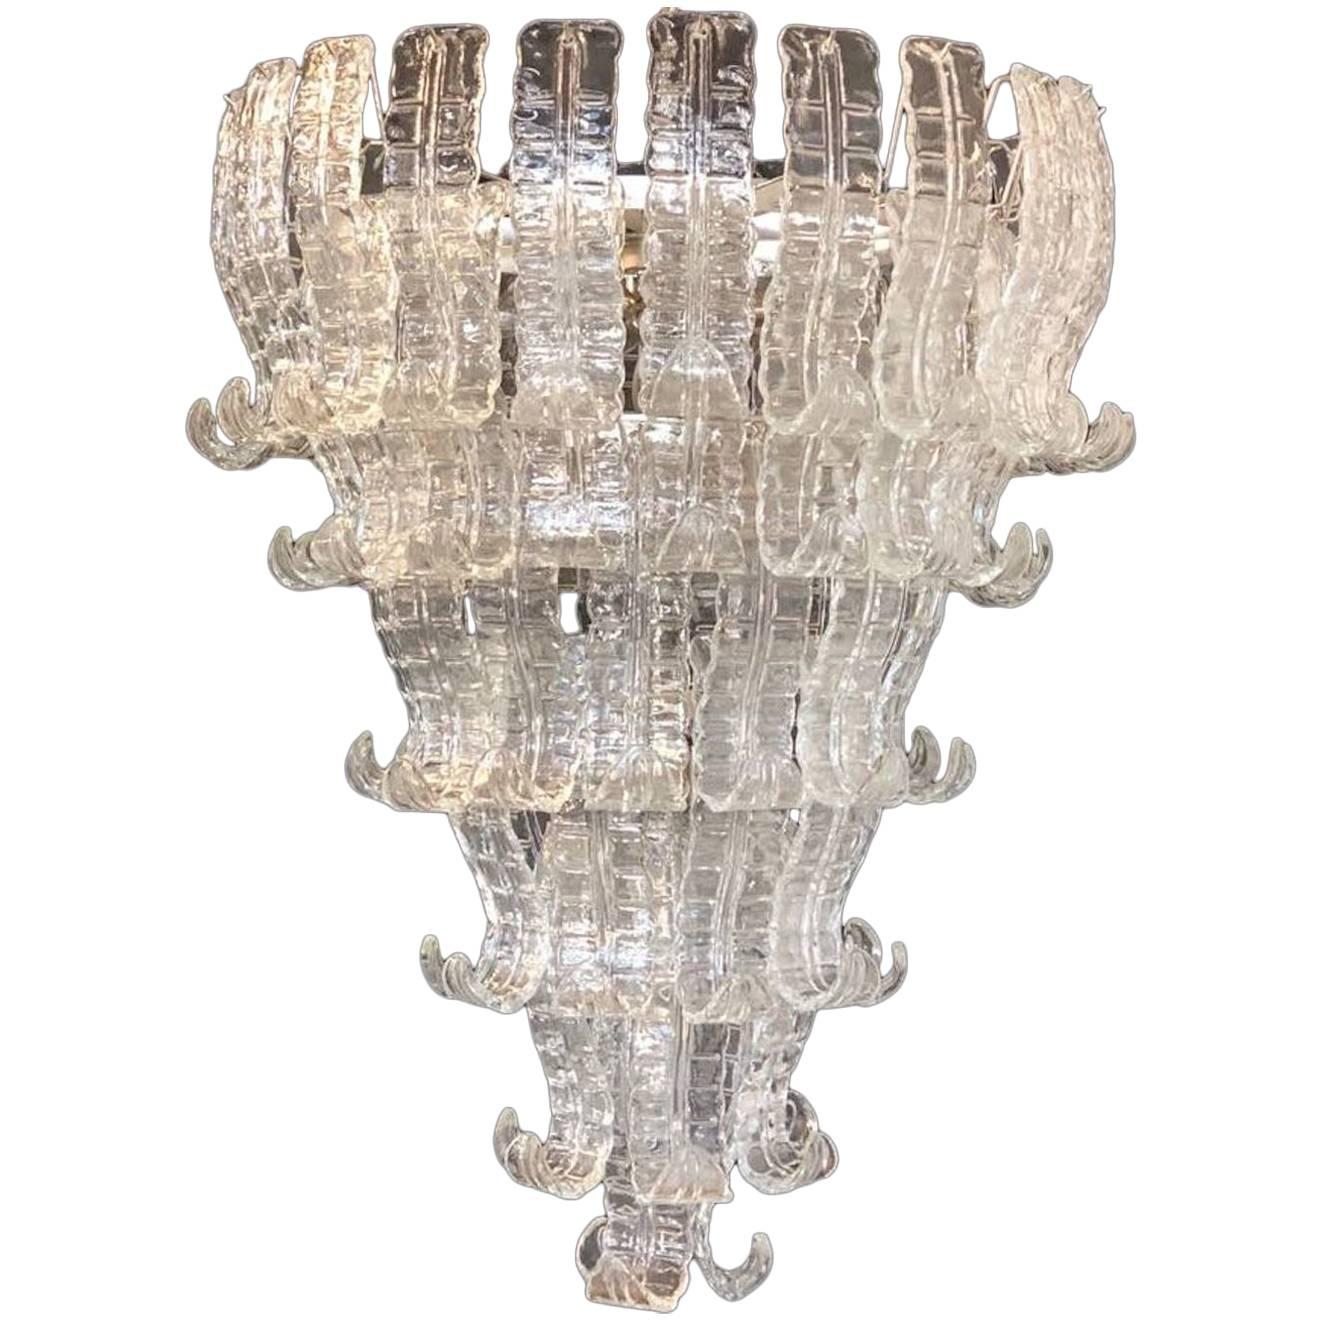 Impressive Murano Glass Chandelier by Barovier & Toso, Italy, 1970s